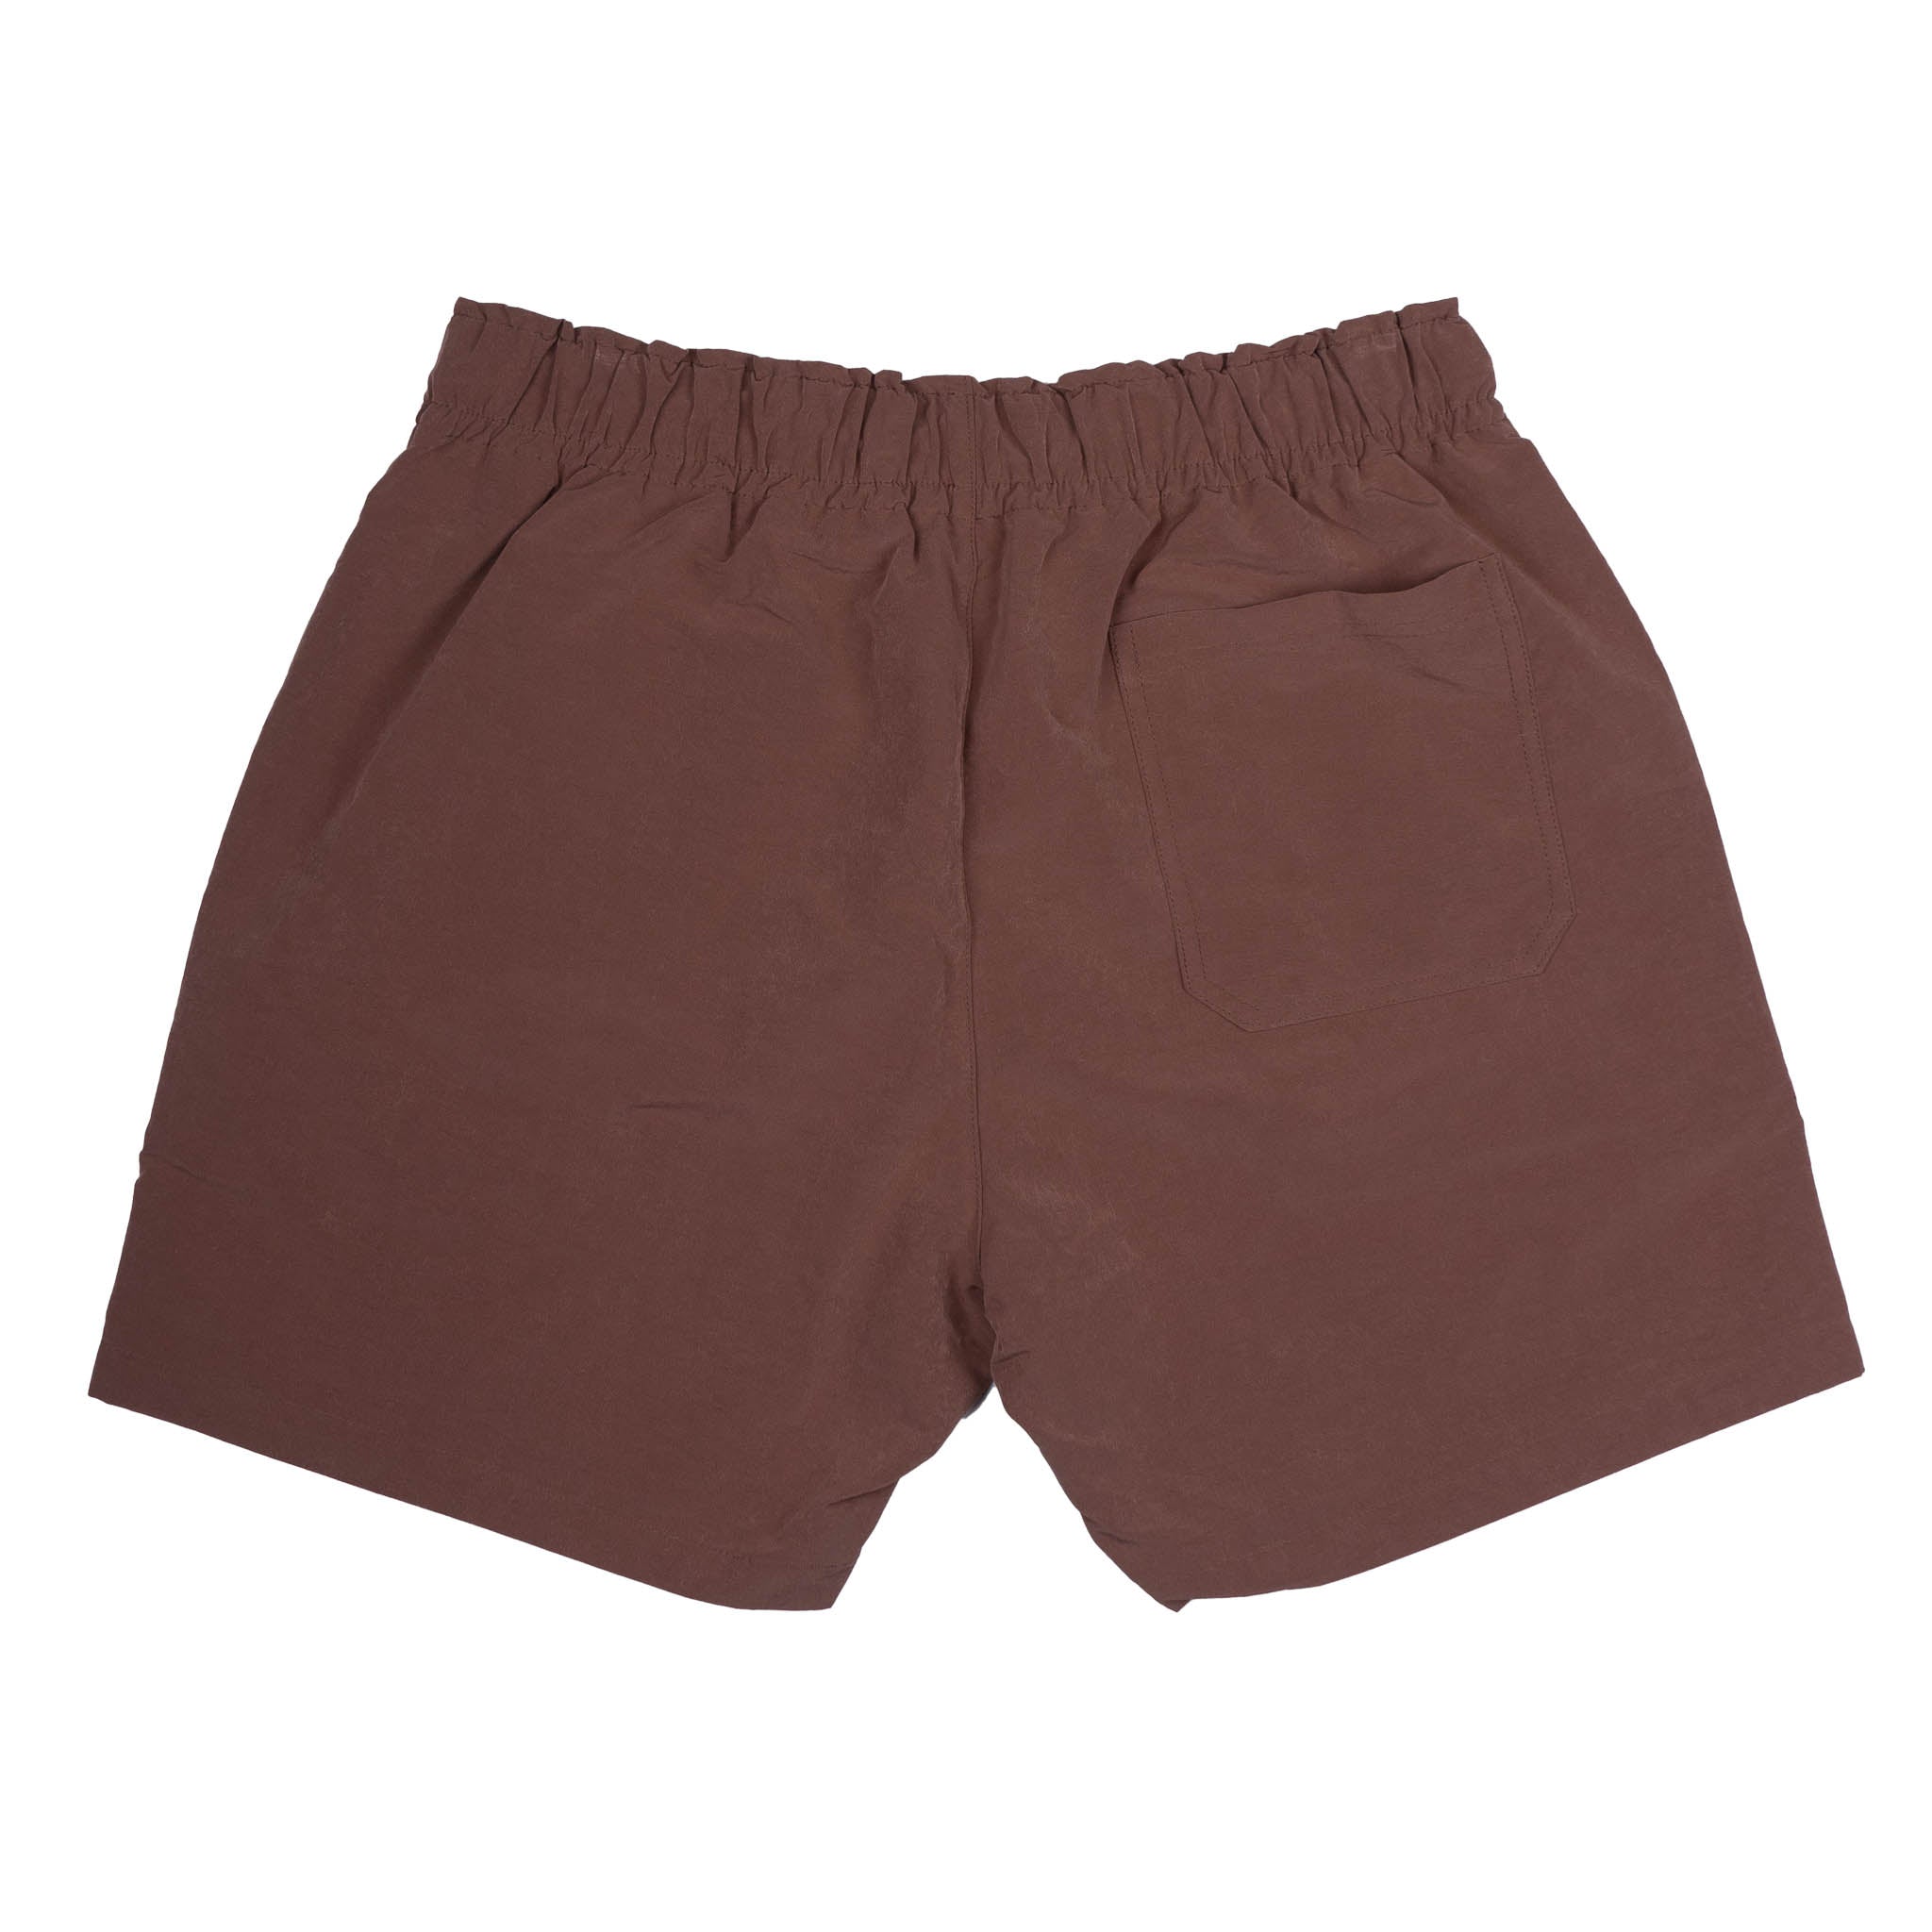 LIFTED ANCHOR CARGO SHORTS BROWN - LA22SP2-30